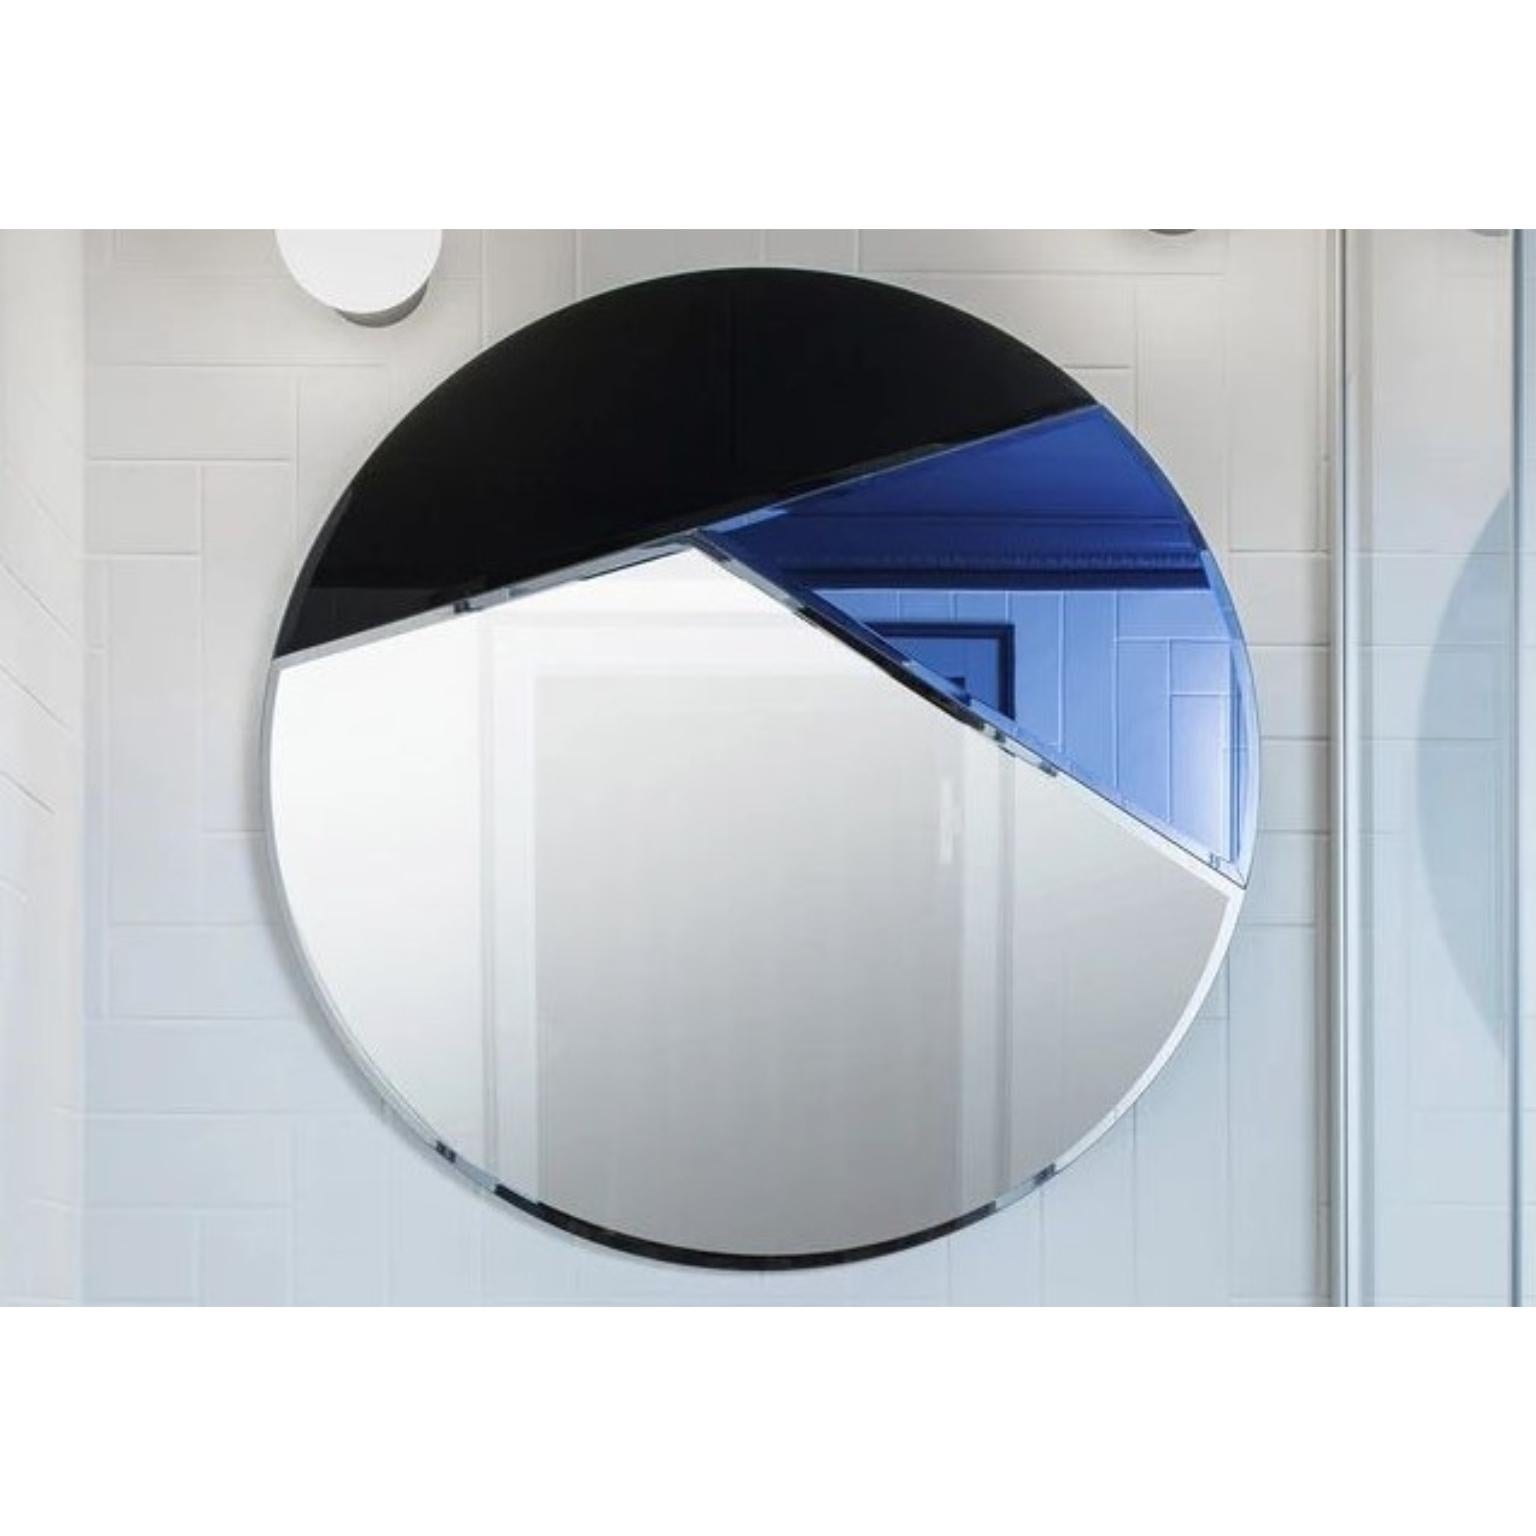 Round Nouveau 80 mirror.
Dimensions: Ø 80 x 1.2 cm
Material: 4 mm faceted mirror on black painted MDF
Weight: 9 kg.


The Nouveau round mirror series unites elegance with simplicity and is characterized by its geometric colour detailing. The